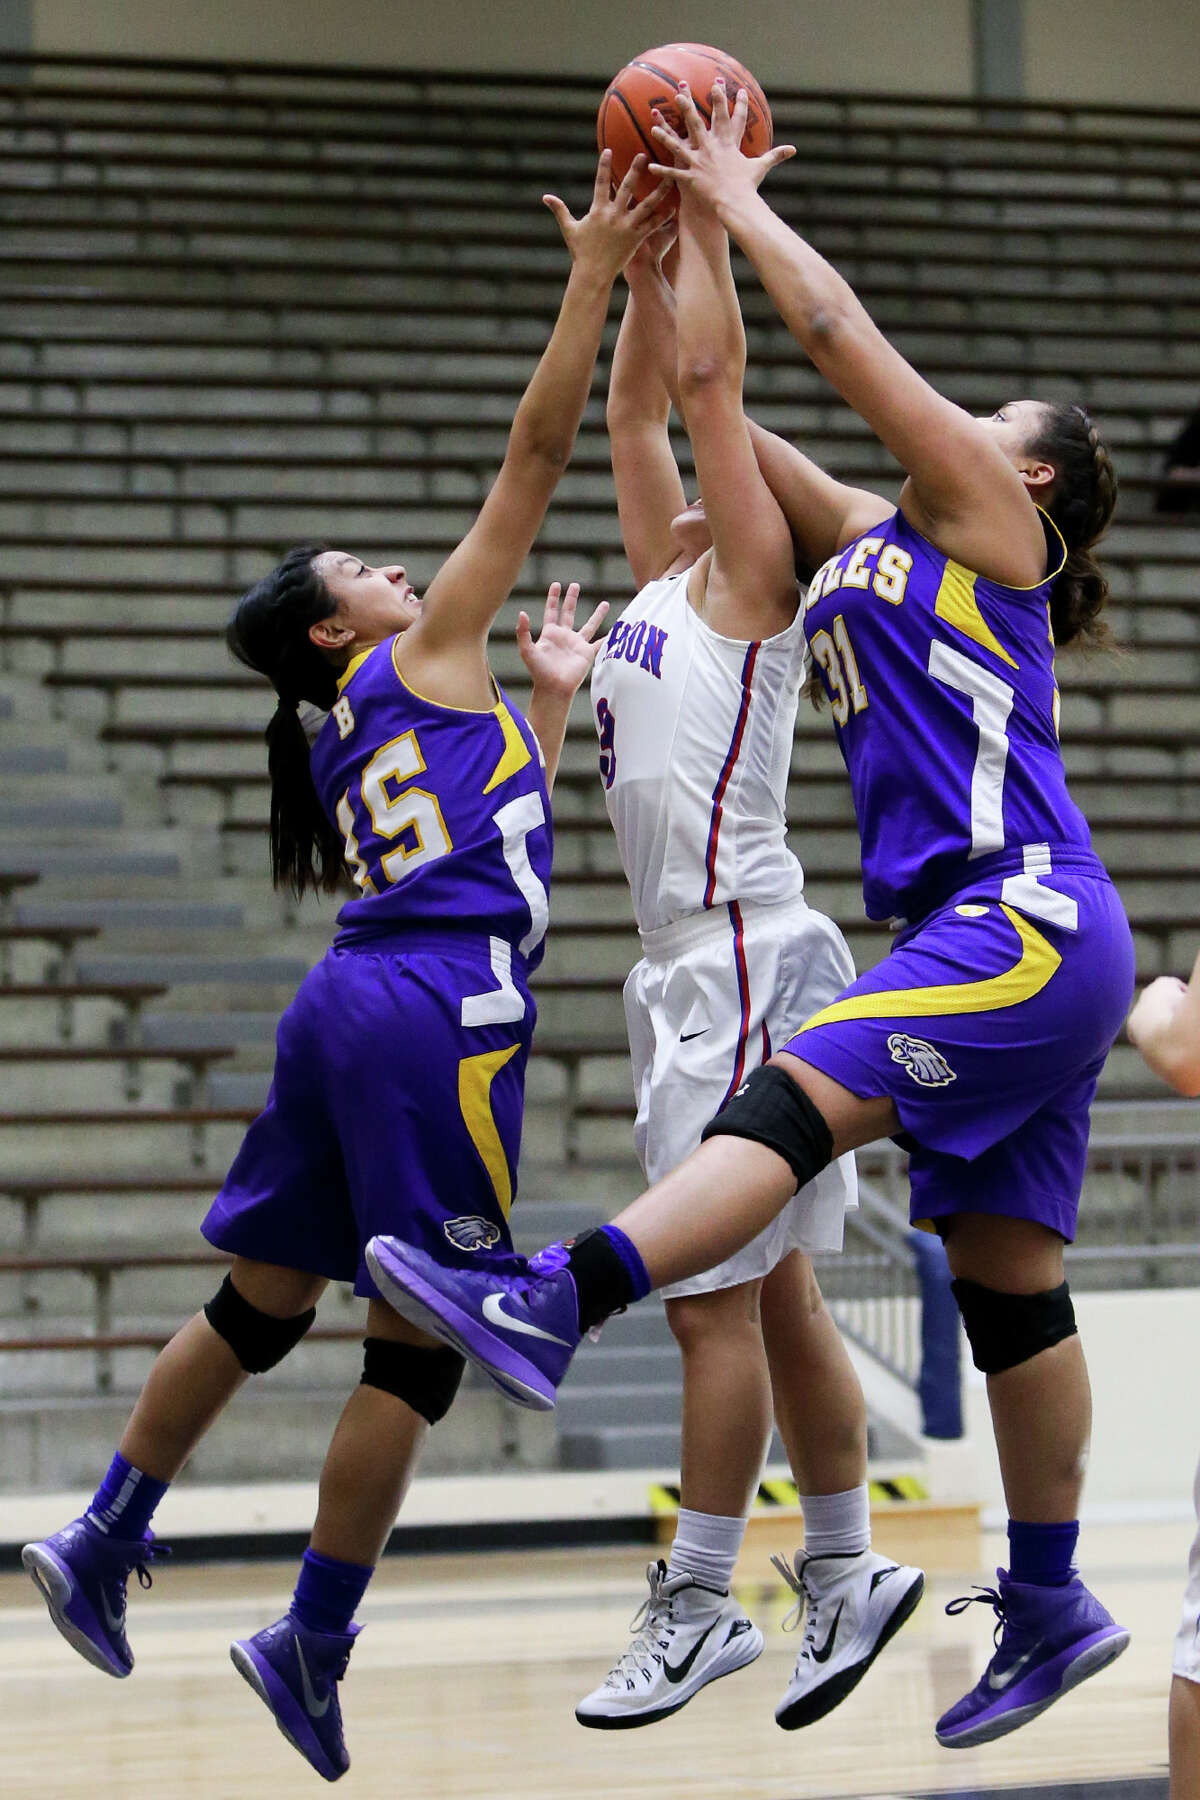 Brackenridge's Clarissa Rodriguez (left) and Skyler Reyna battle for a rebound with Jefferson's Angela Hardcastle (center) during the first half of their game at the Alamo Convocation Center on Tuesday, Feb. 10, 2015. Brackenridge beat Jefferson 66-38. MARVIN PFEIFFER/ mpfeiffer@express-news.net